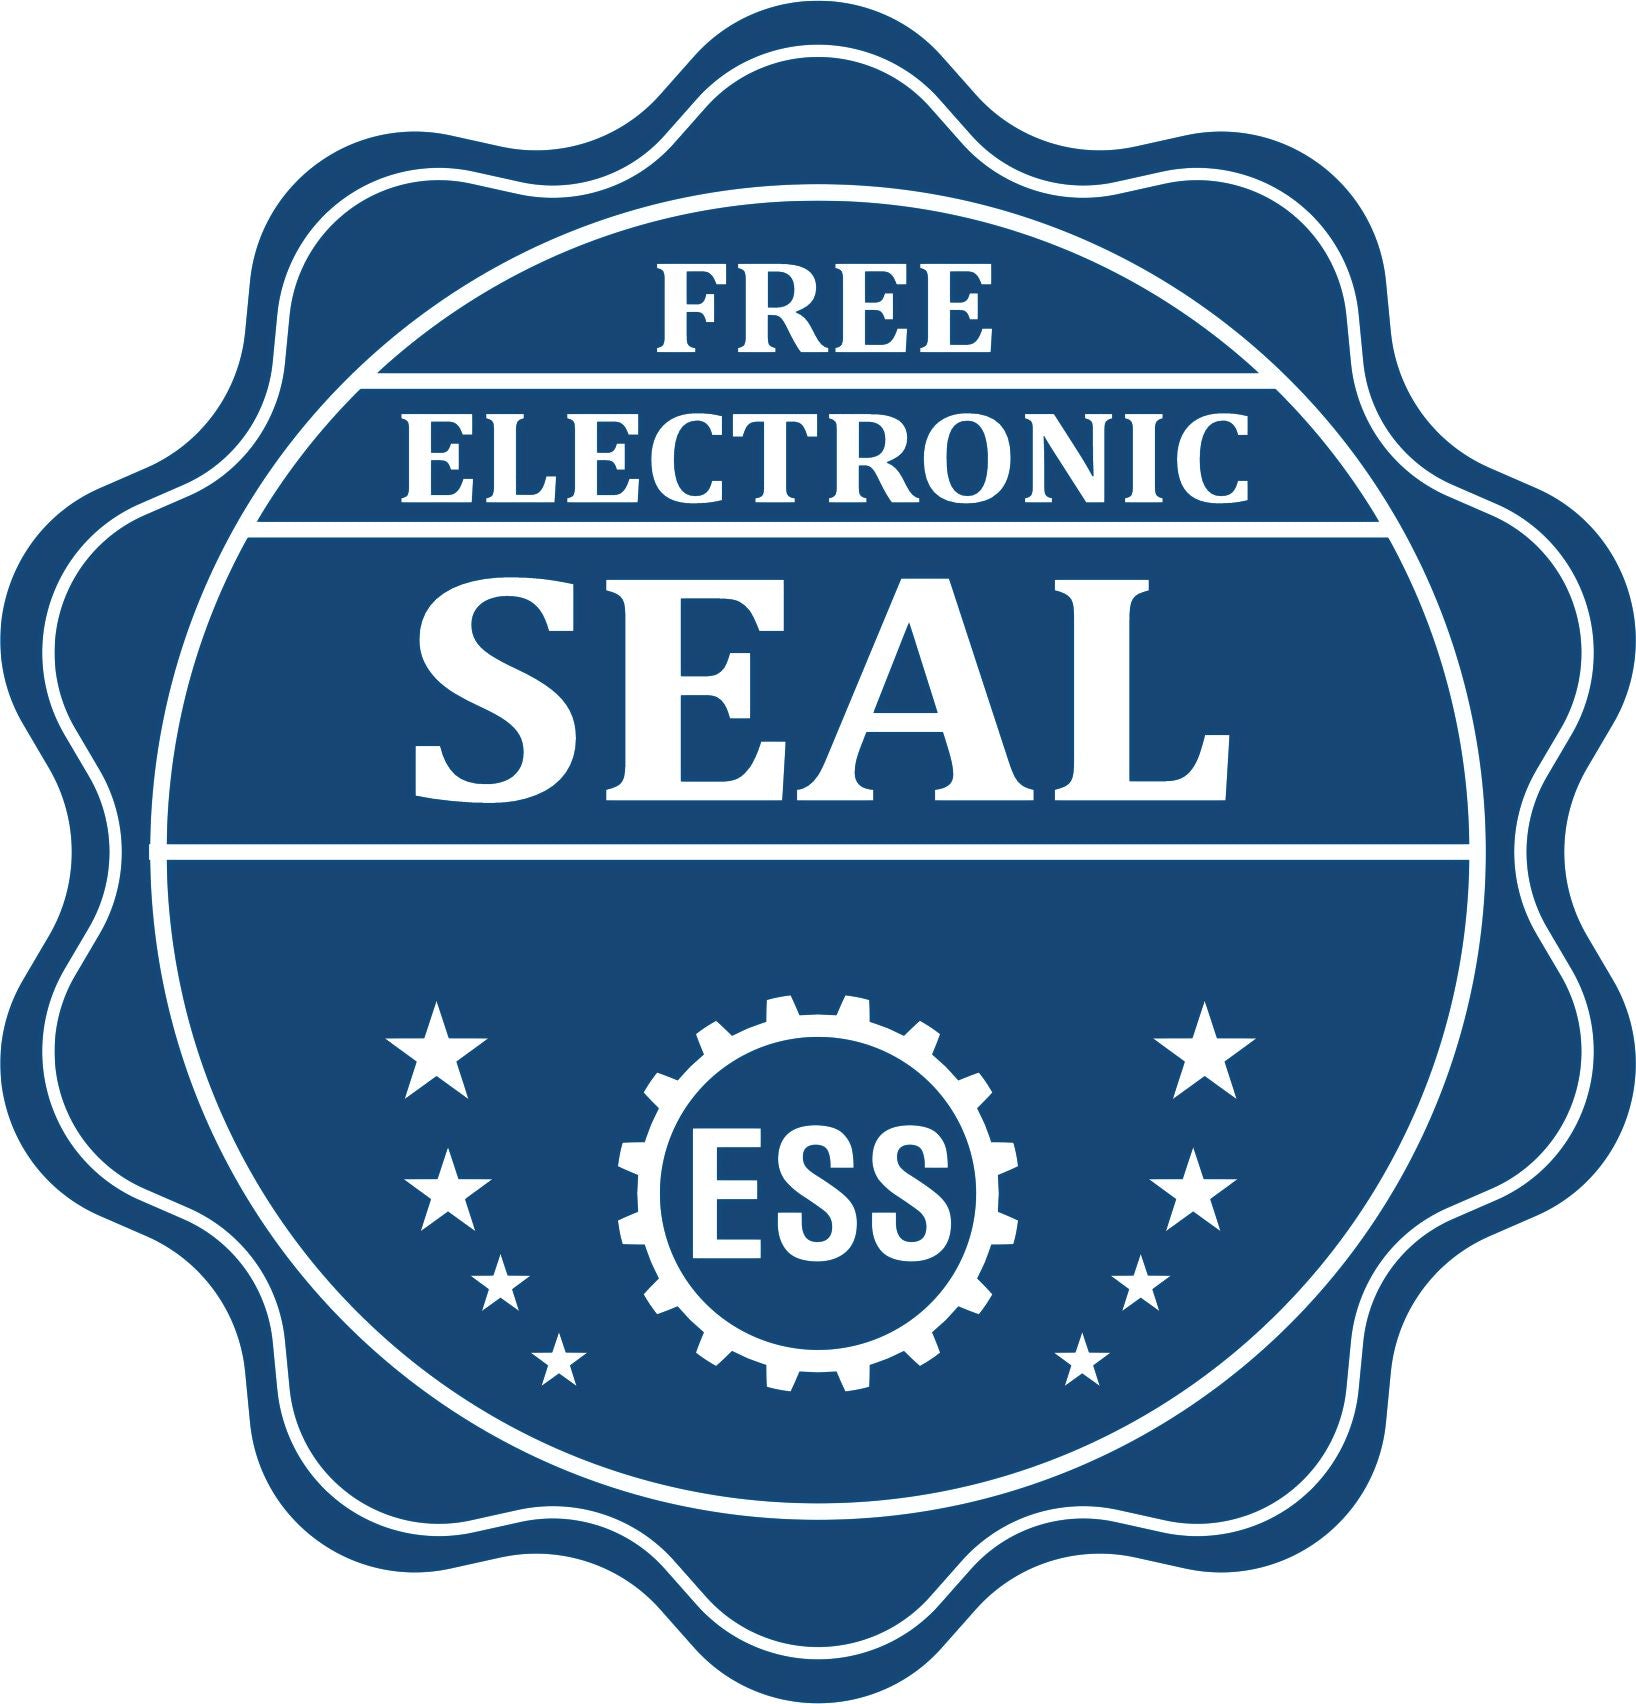 A badge showing a free electronic seal for the Gift West Virginia Landscape Architect Seal with stars and the ESS gear on the emblem.